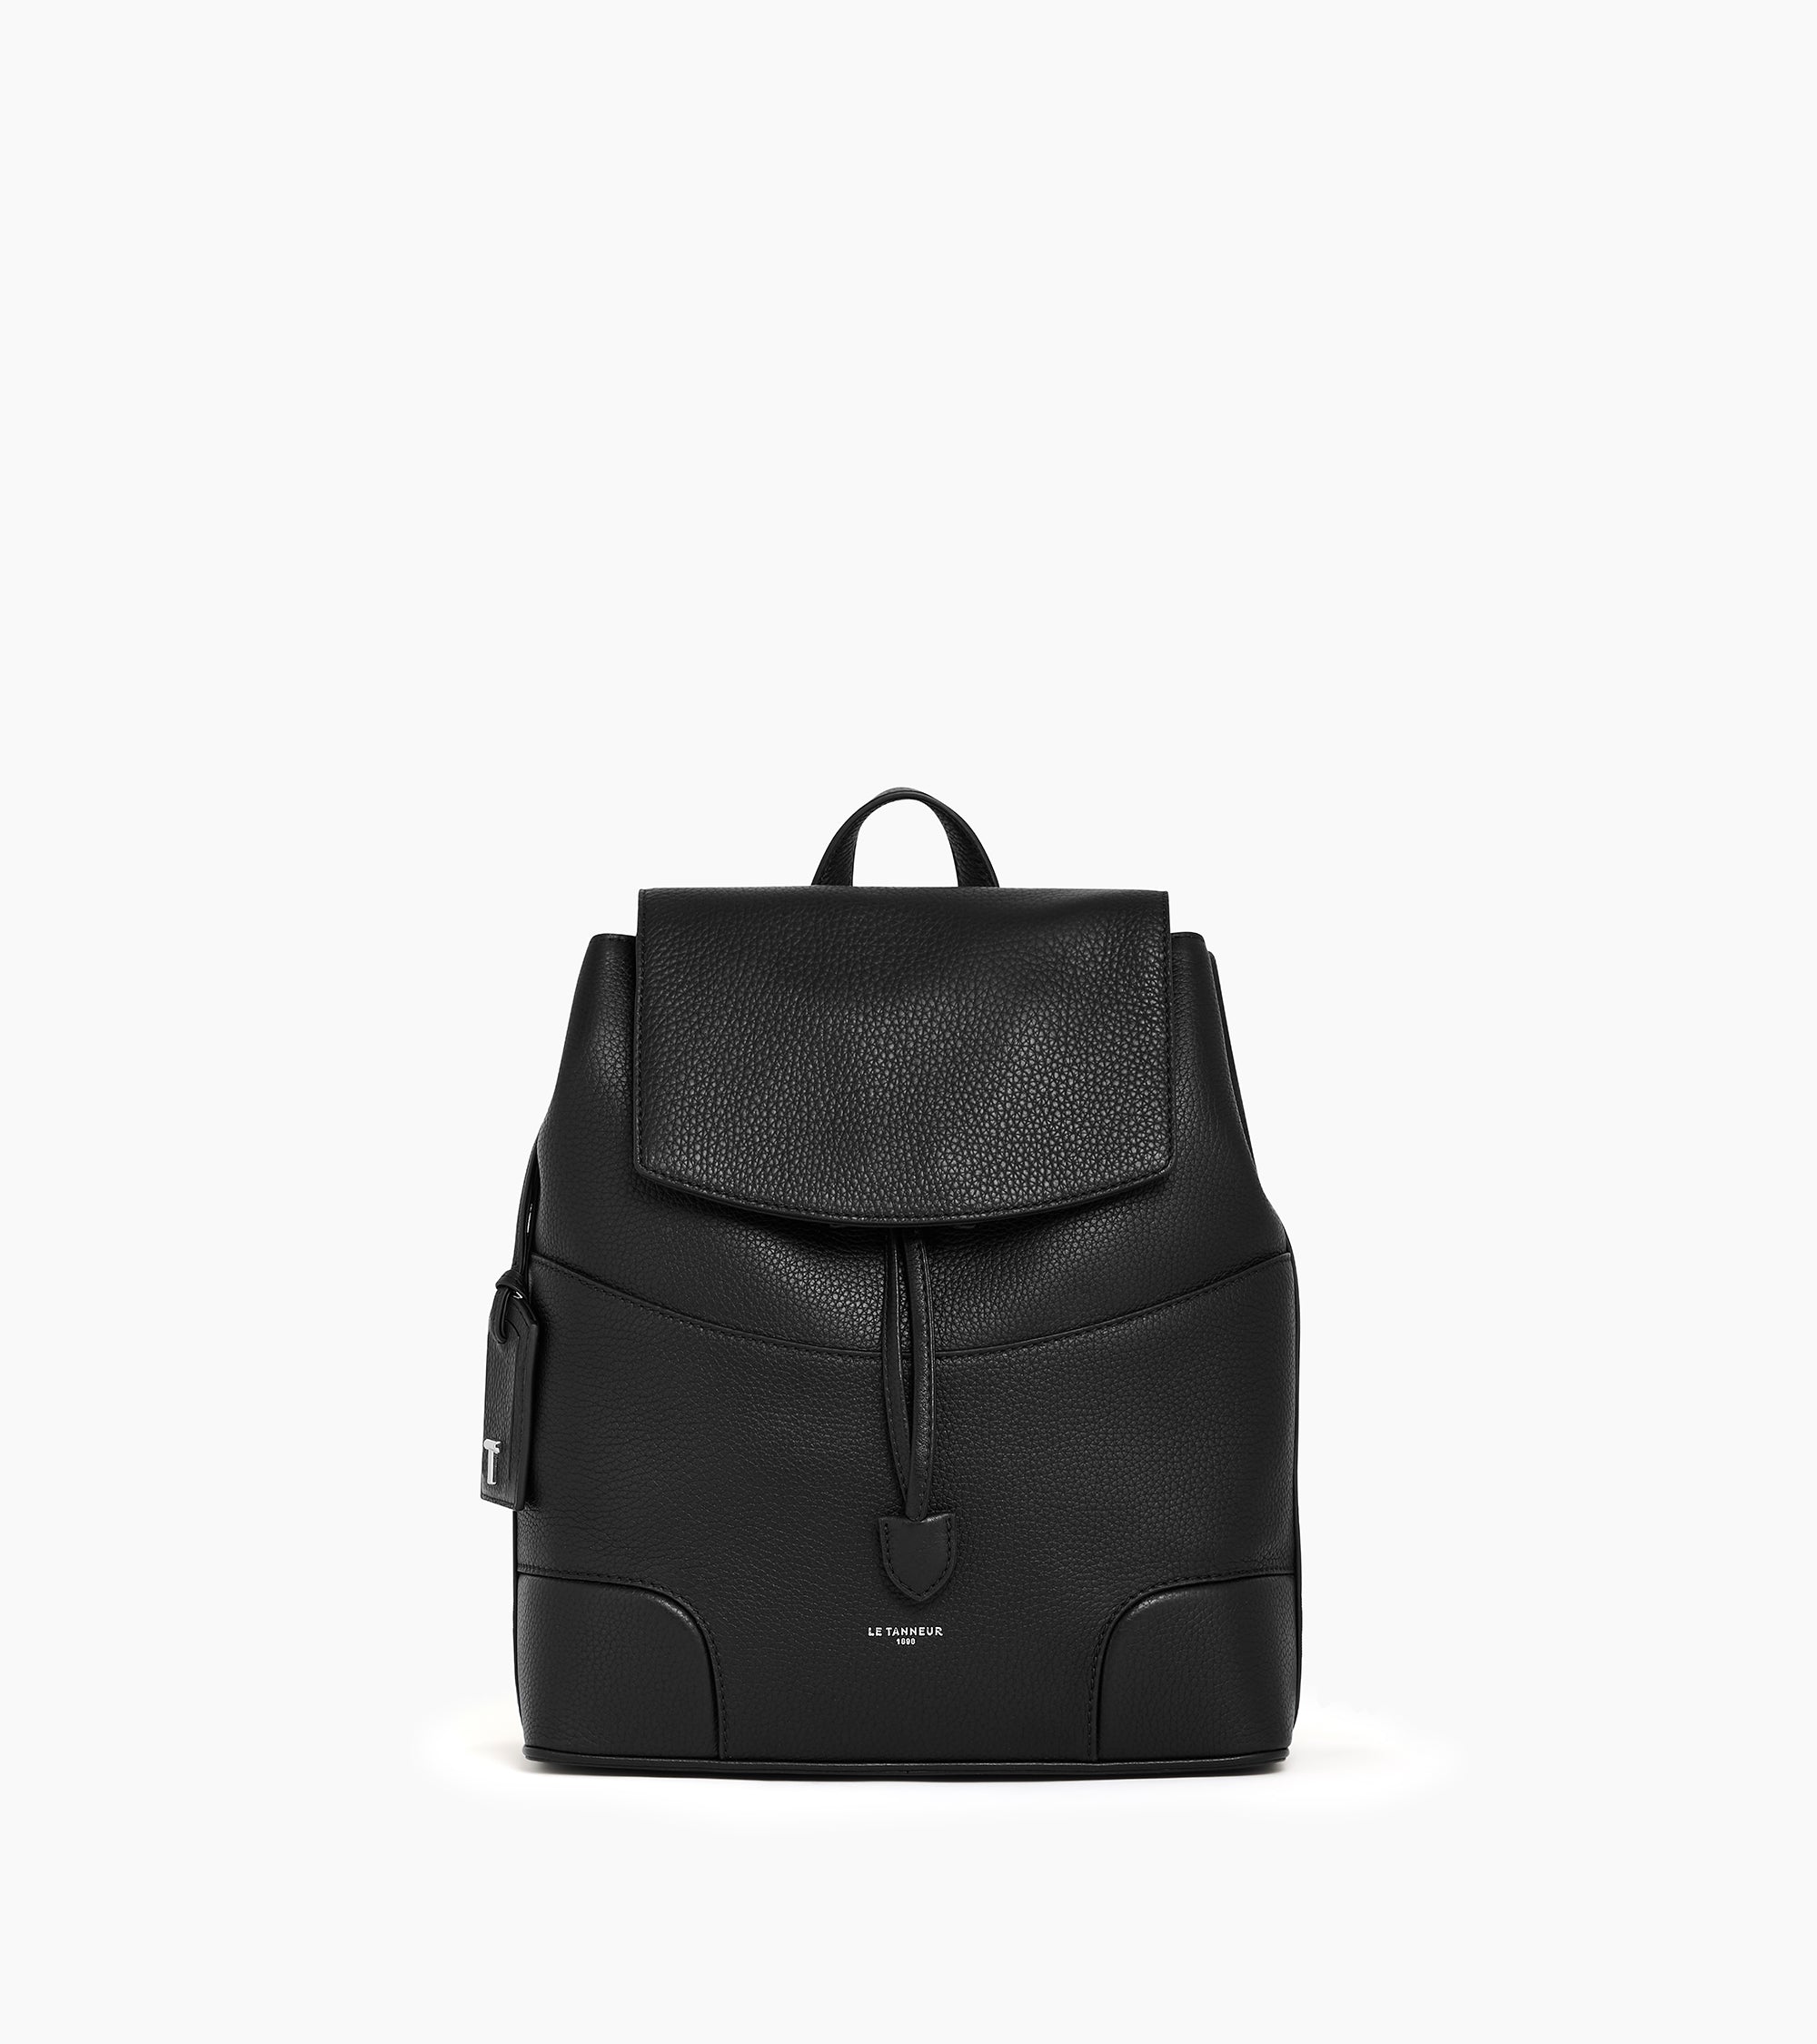 Romy flap-closure backpack in pebbled leather